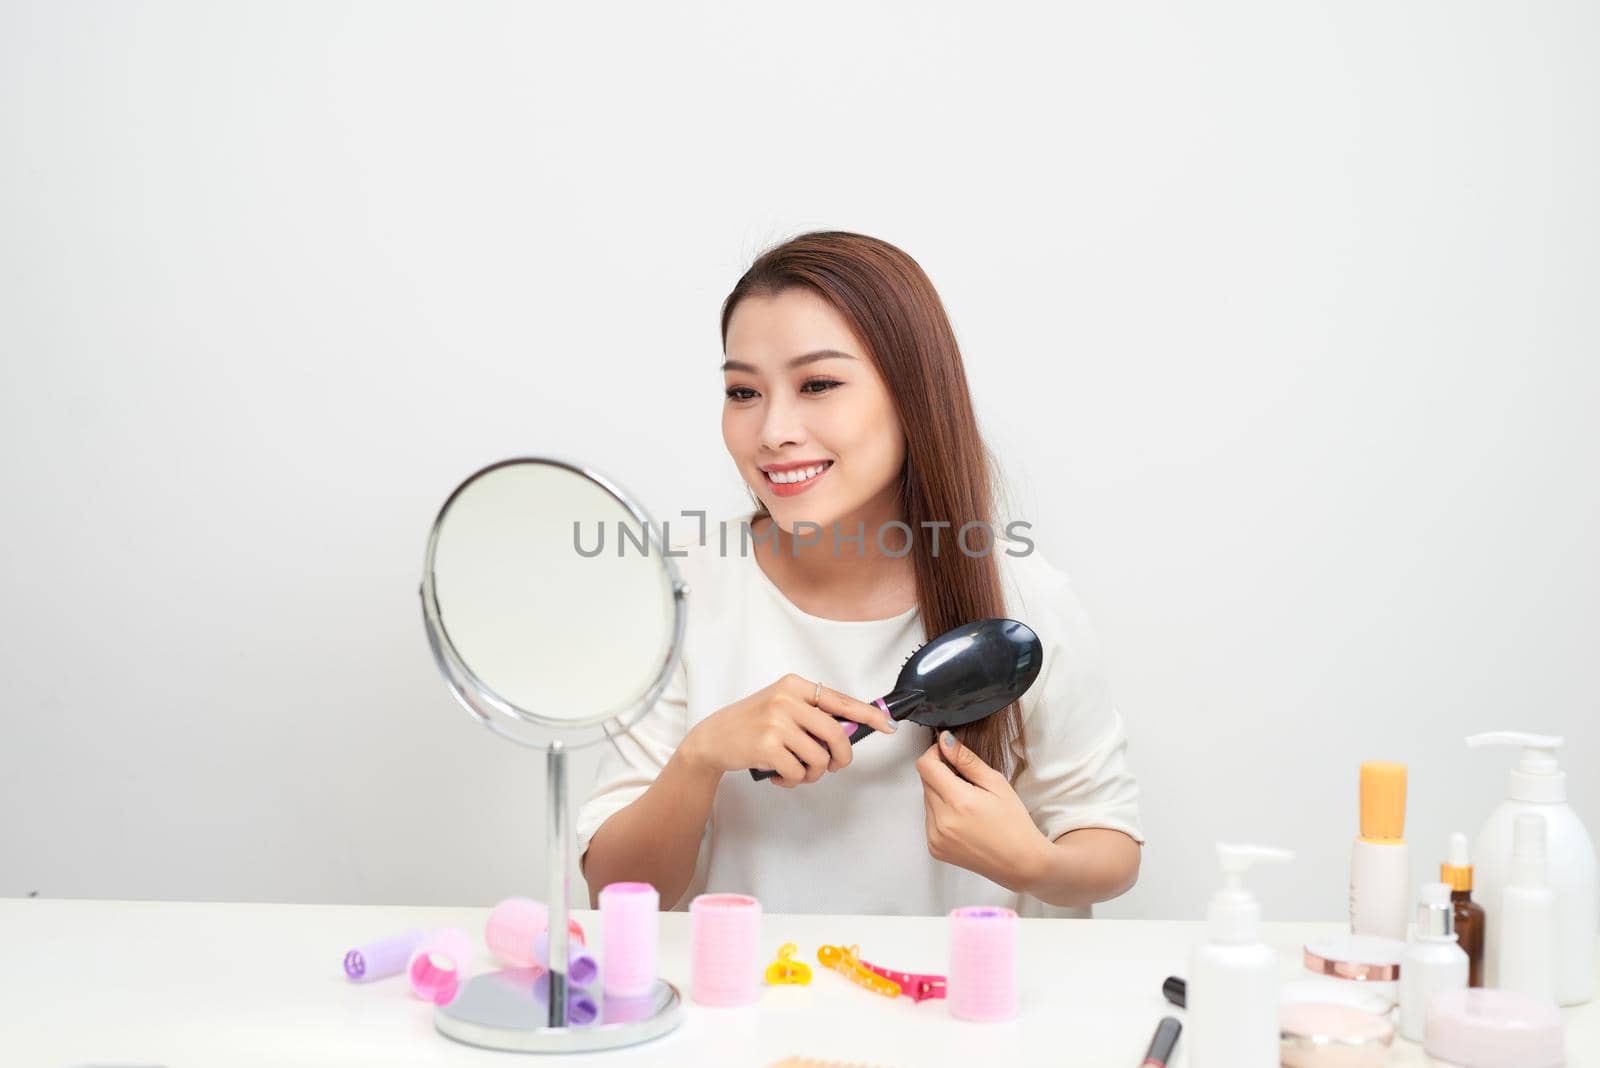 Getting rid of tangles. Beautiful young woman looking at her reflection in mirrorand brushing her long hair while sitting at the dressing table